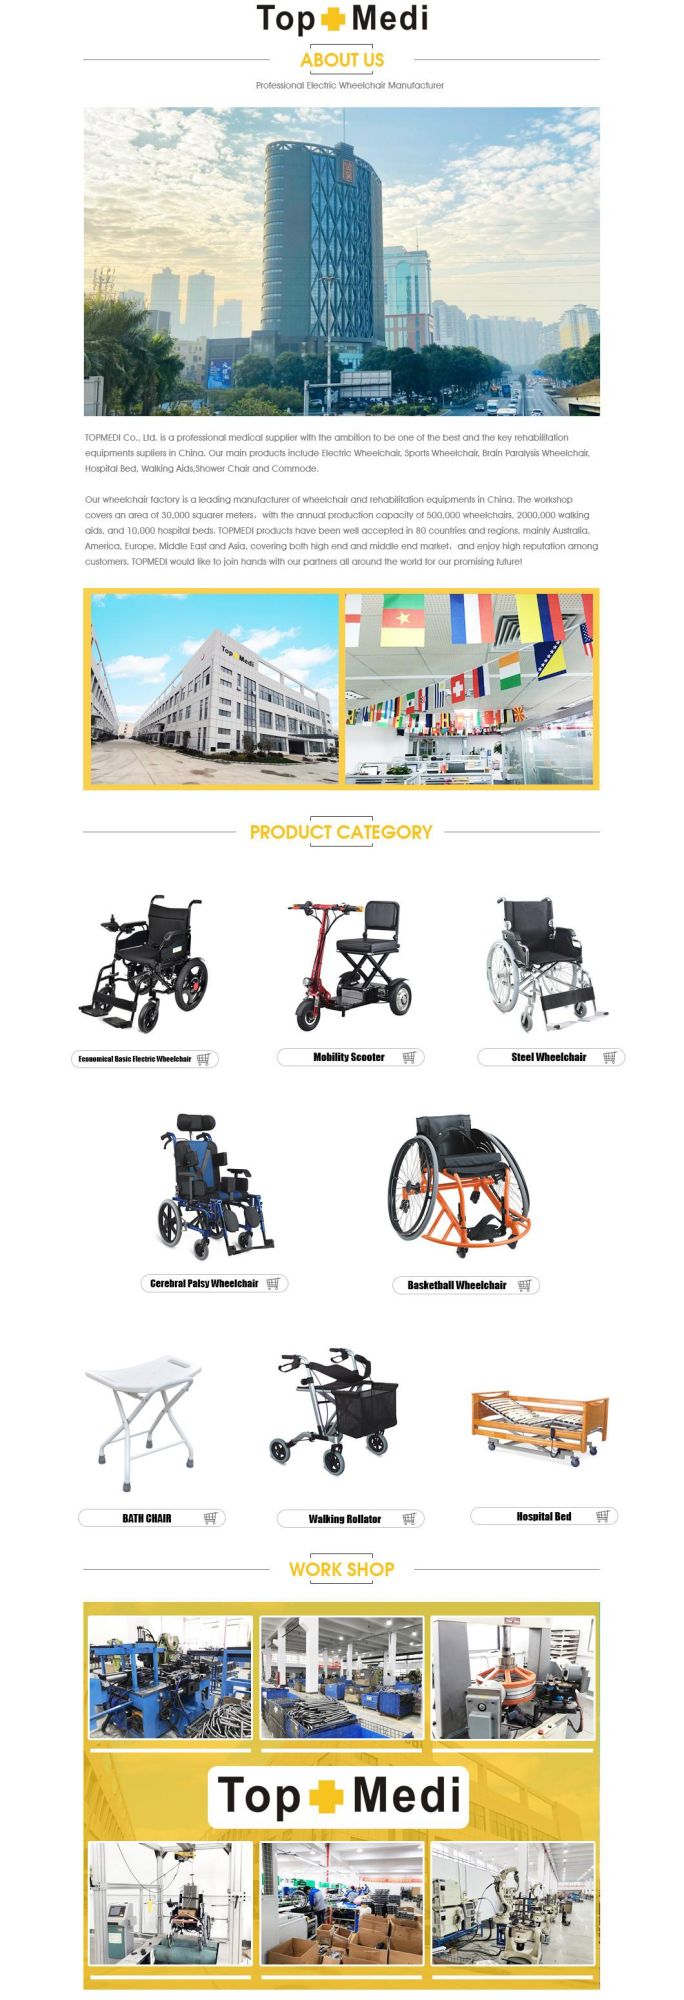 Folding Pediatric Wheelchair Wheel Chairs for Cp Children All Terrain Child Cerebral and Carseat Reclining Commode Disable